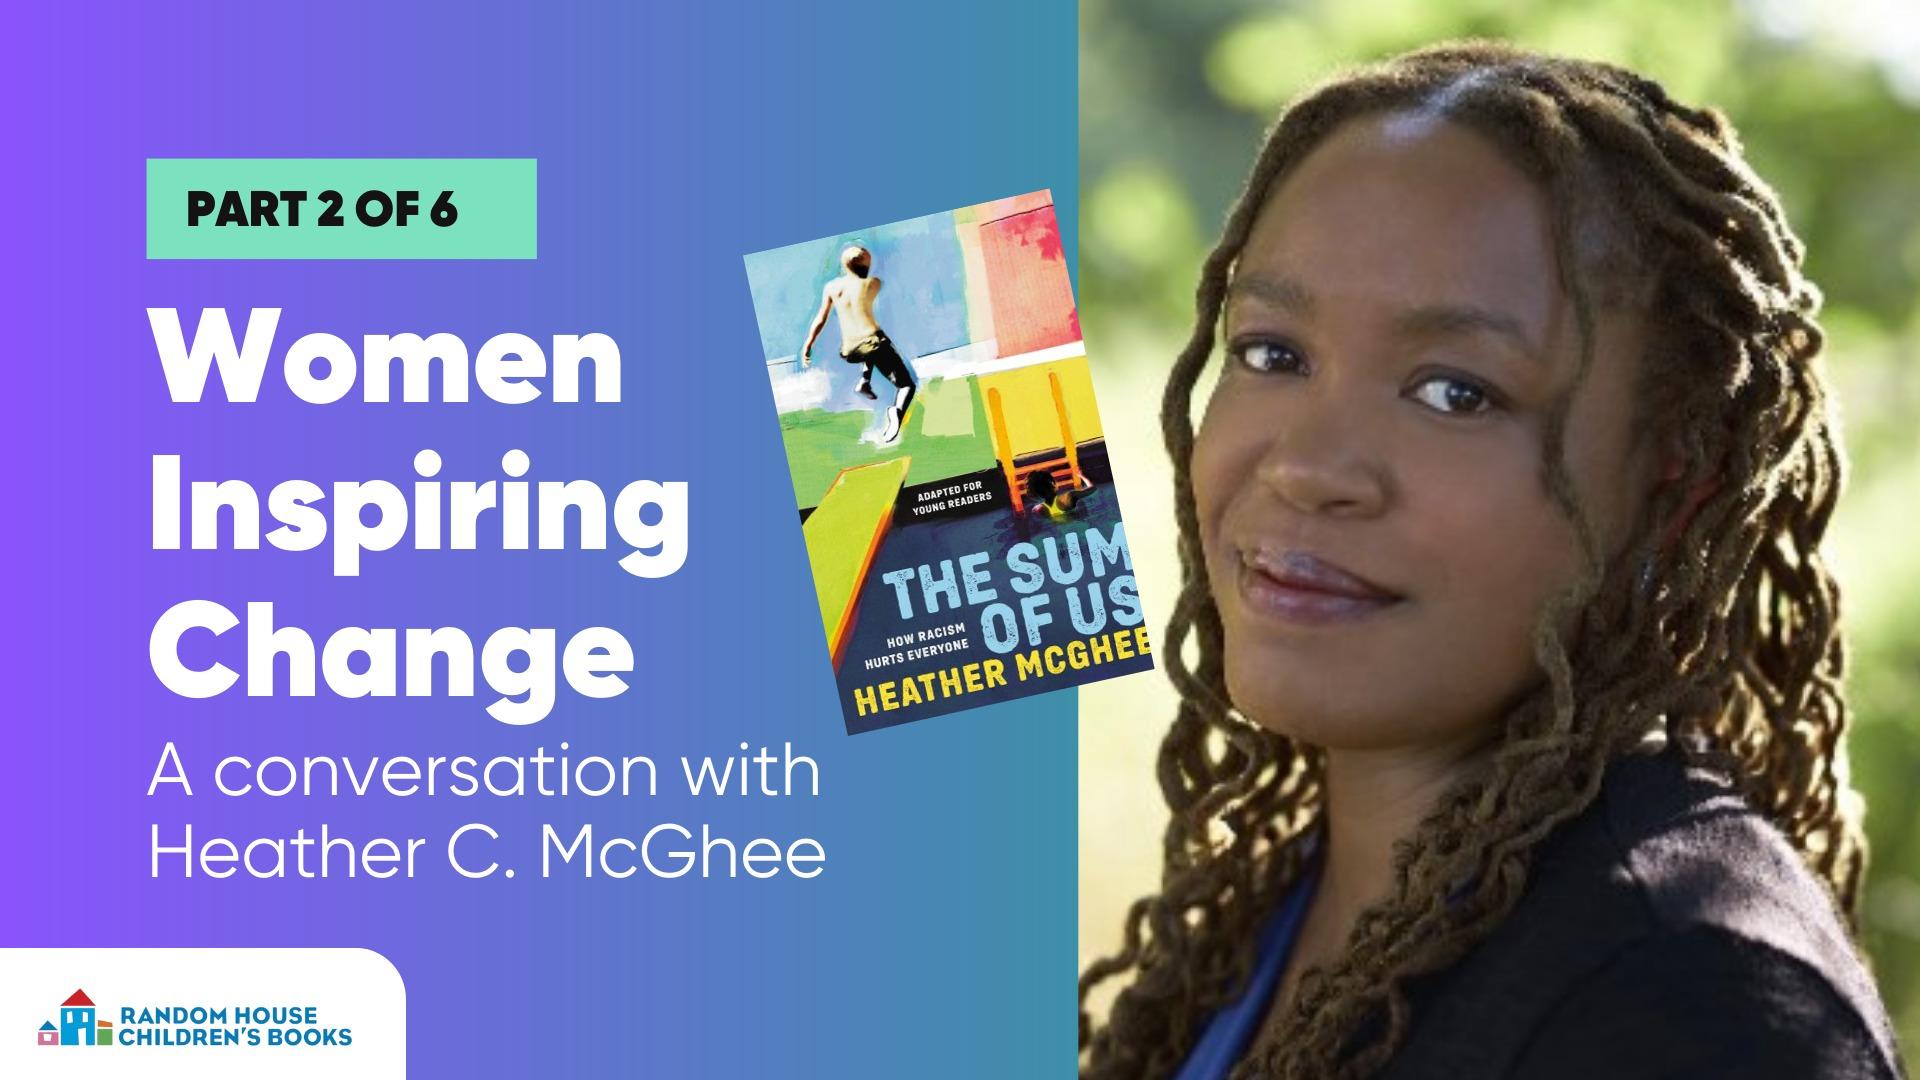 A conversation with Heather C. McGhee -Part 2 of 6 